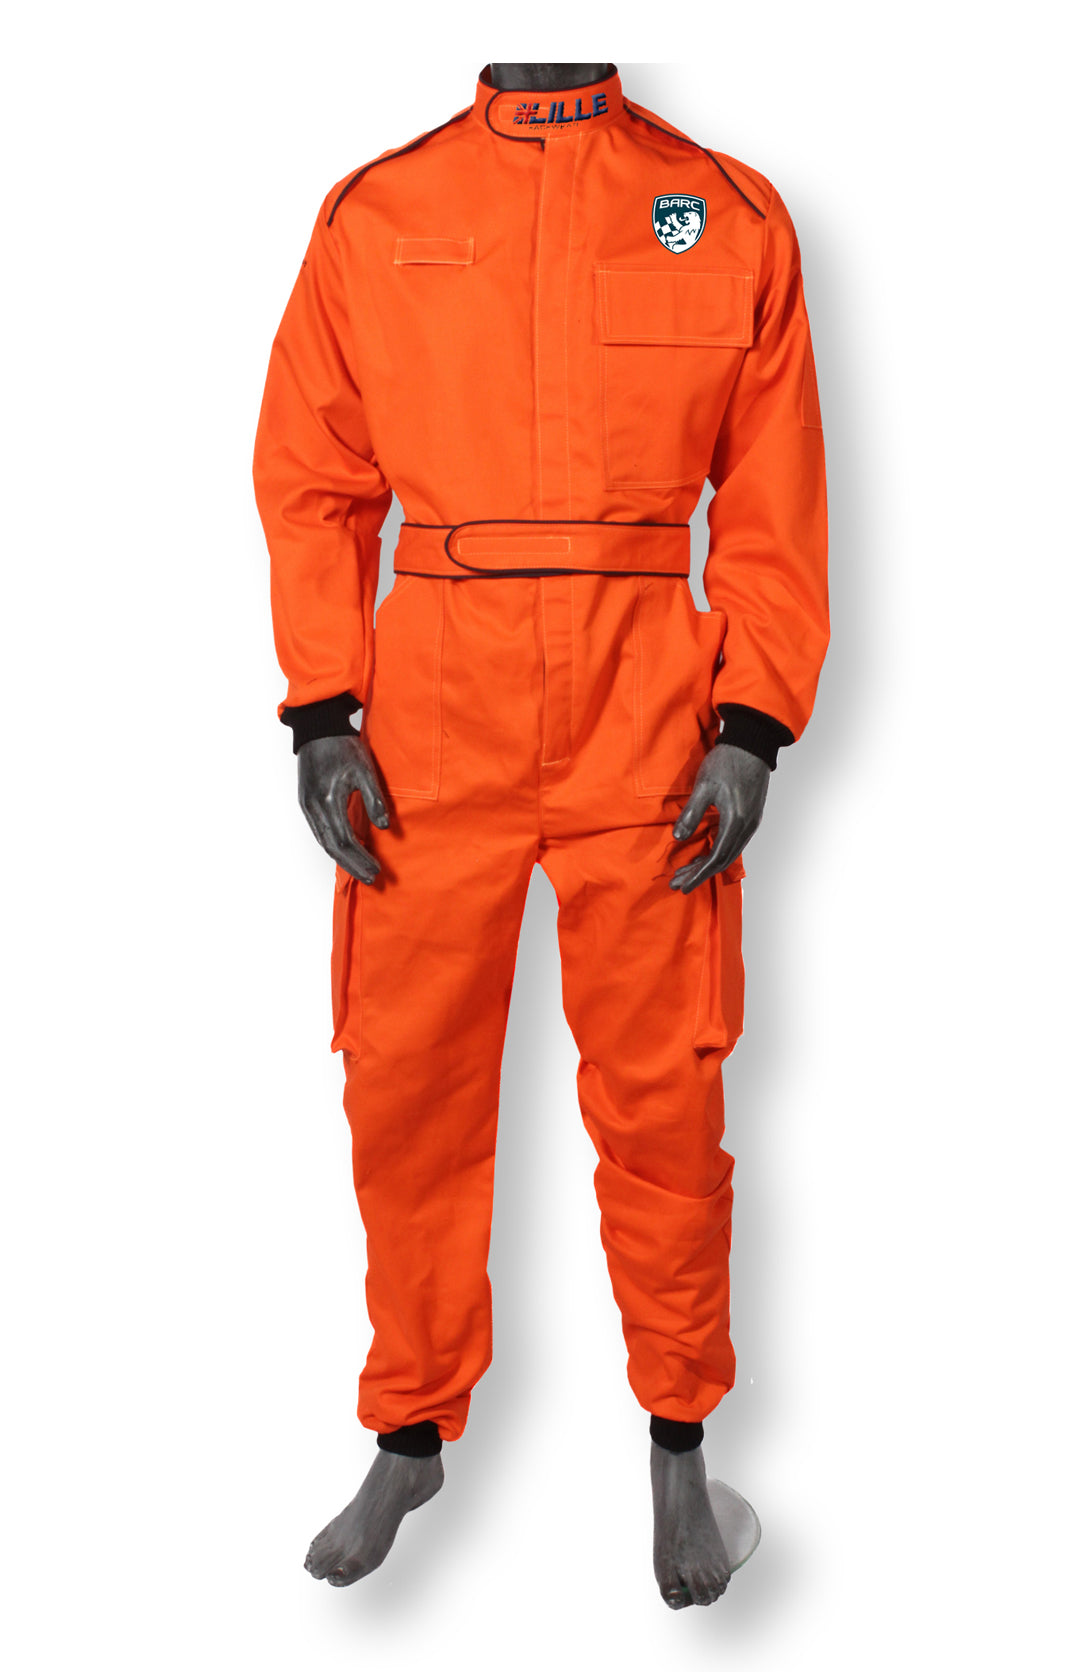 Official BARC Marshal Suit - Made-to-Measure